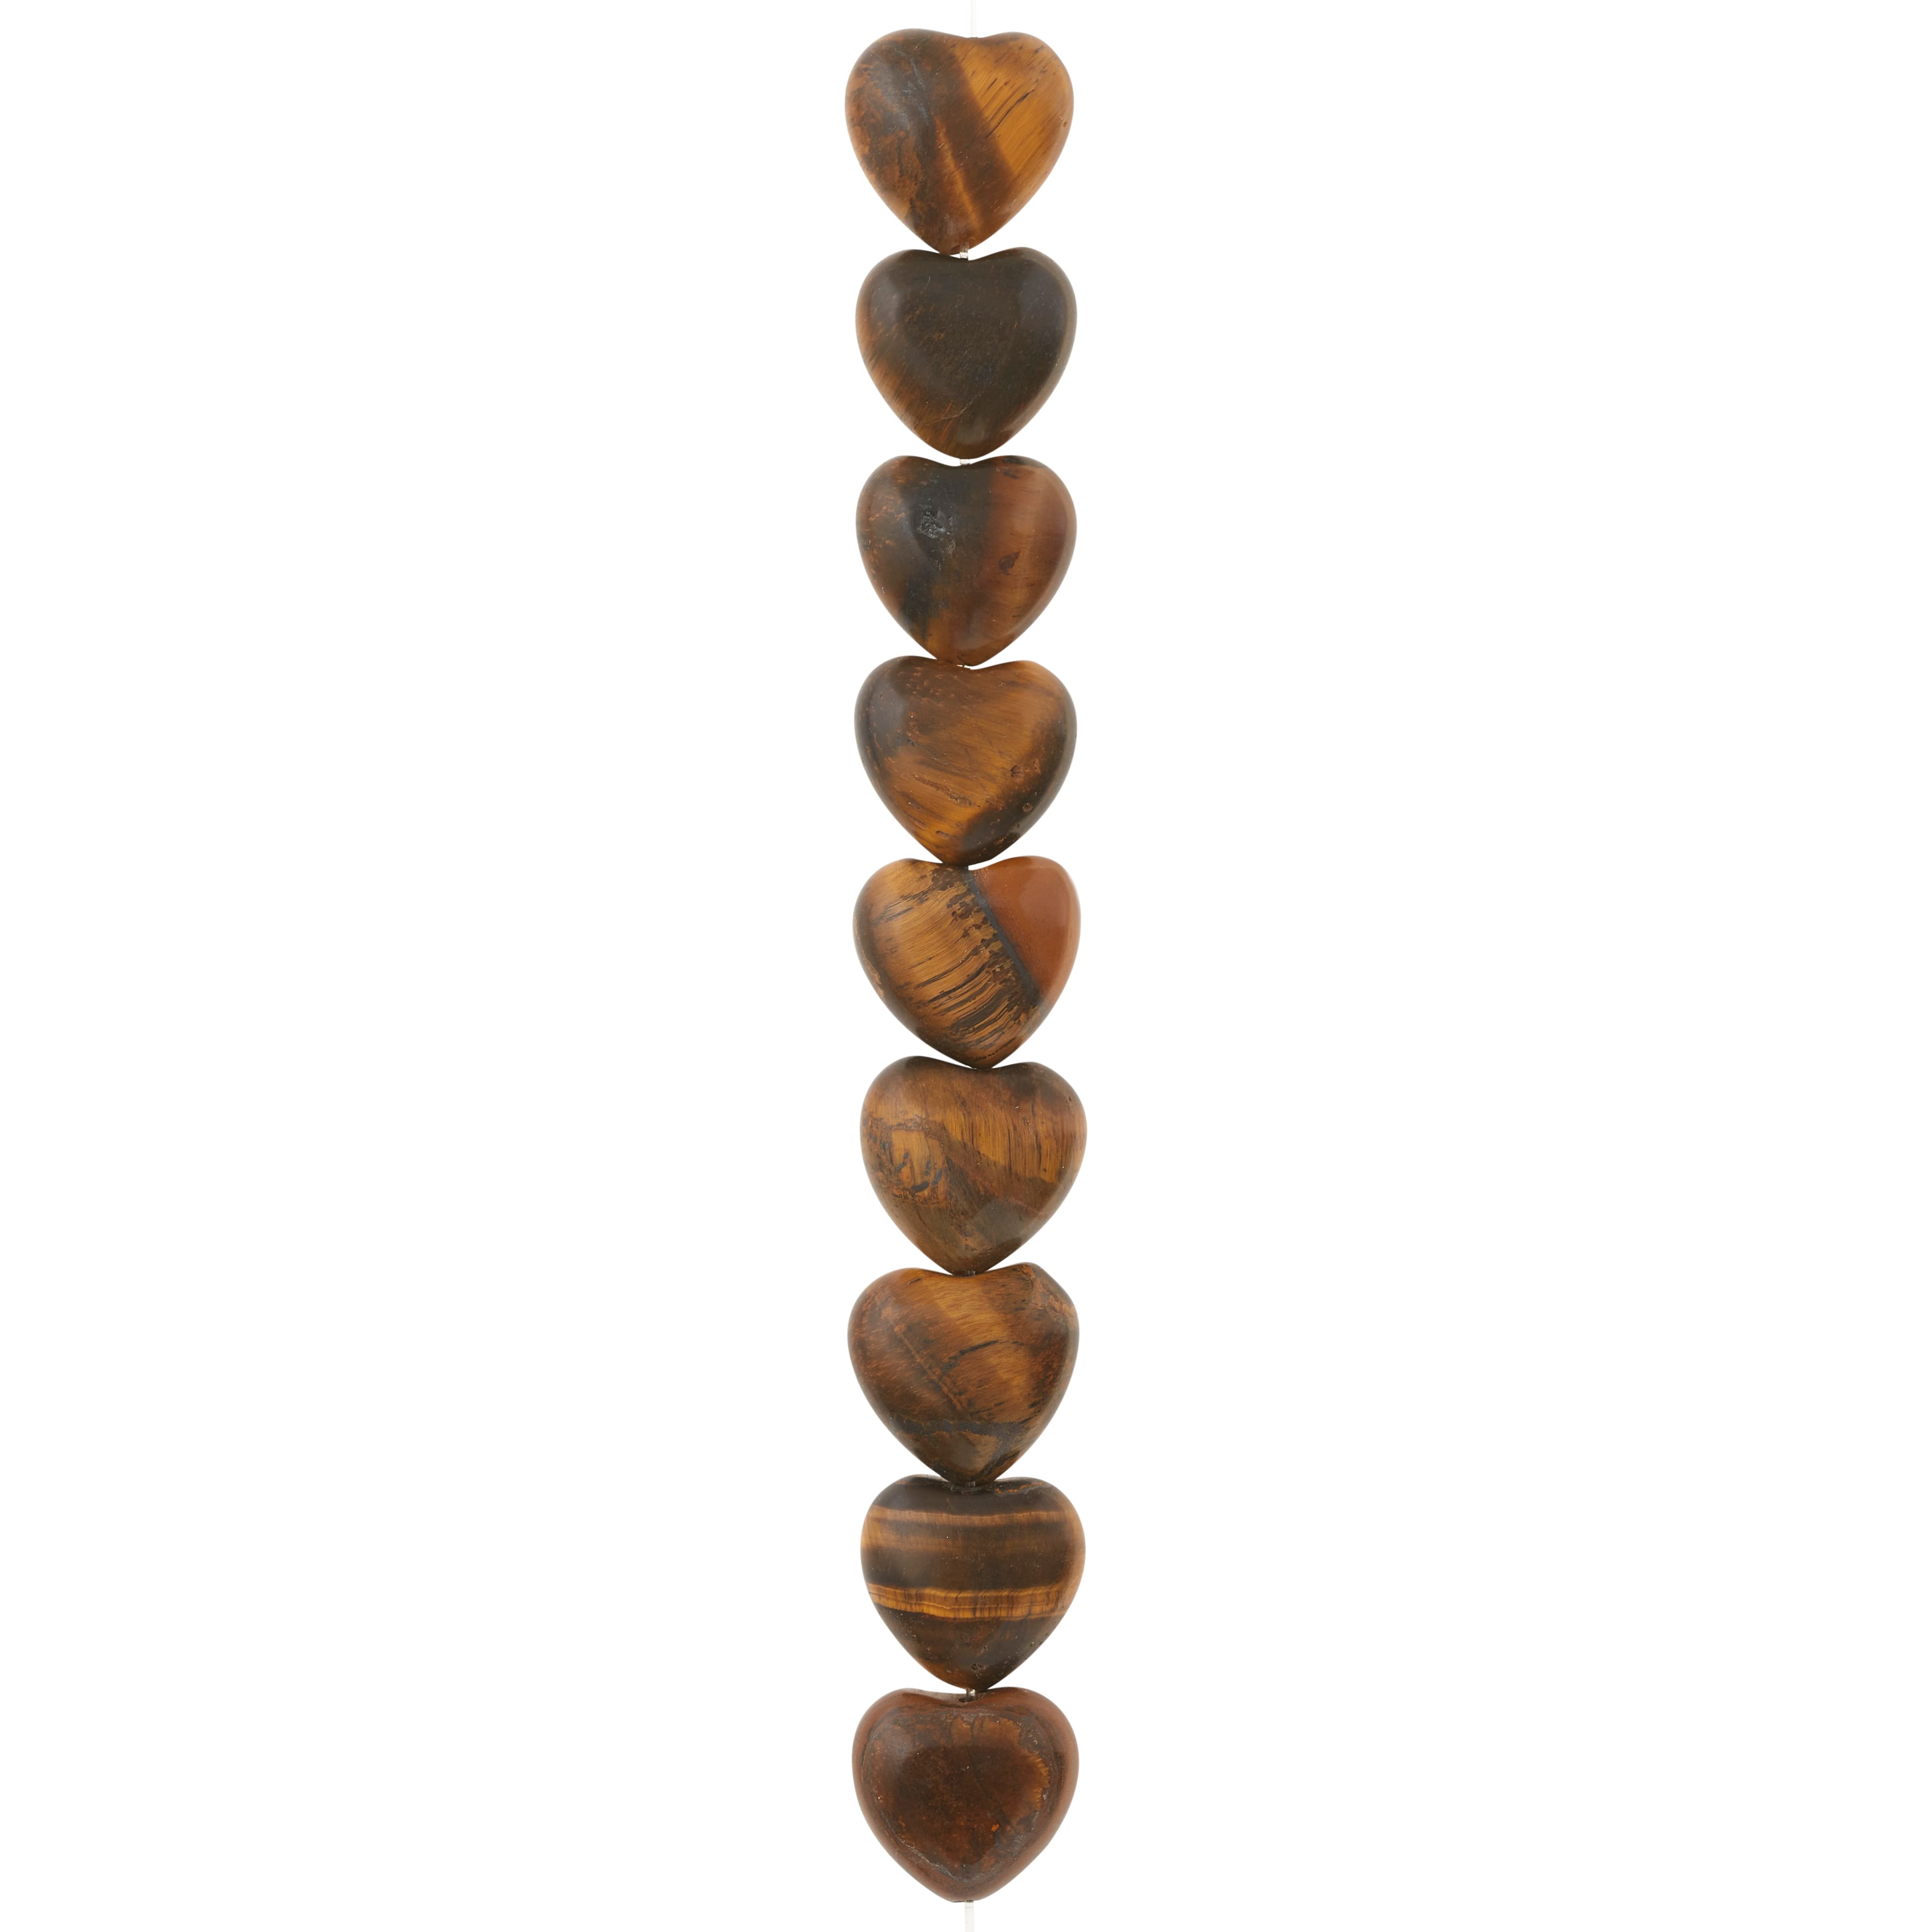 Natural Heart Love Tiger's Eye Gemstone Beads For Jewelry Making Free Shipping 